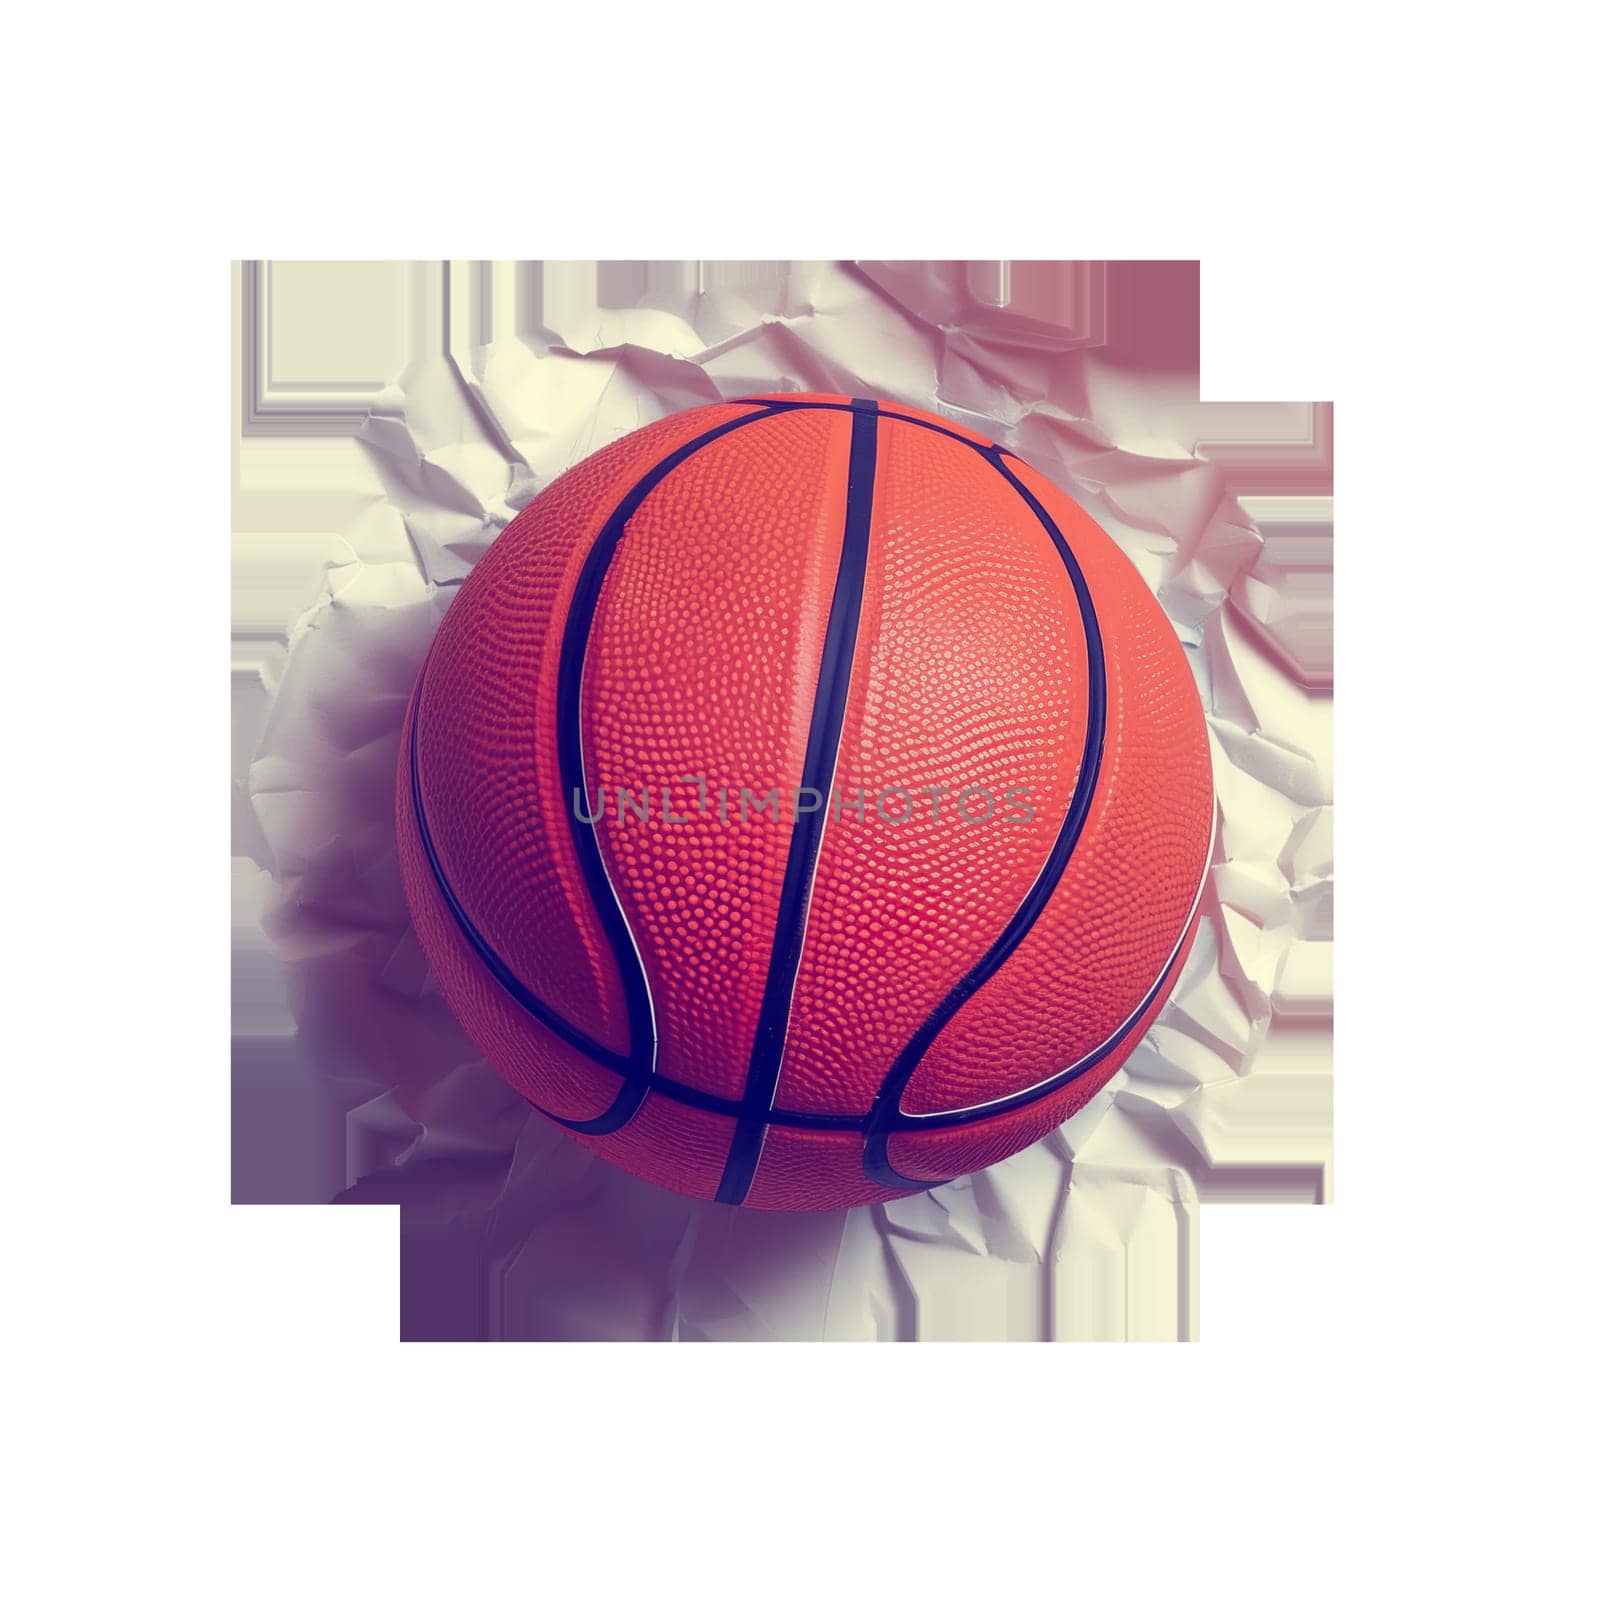 Basketball ball on crumpled paper cut out image by Dustick